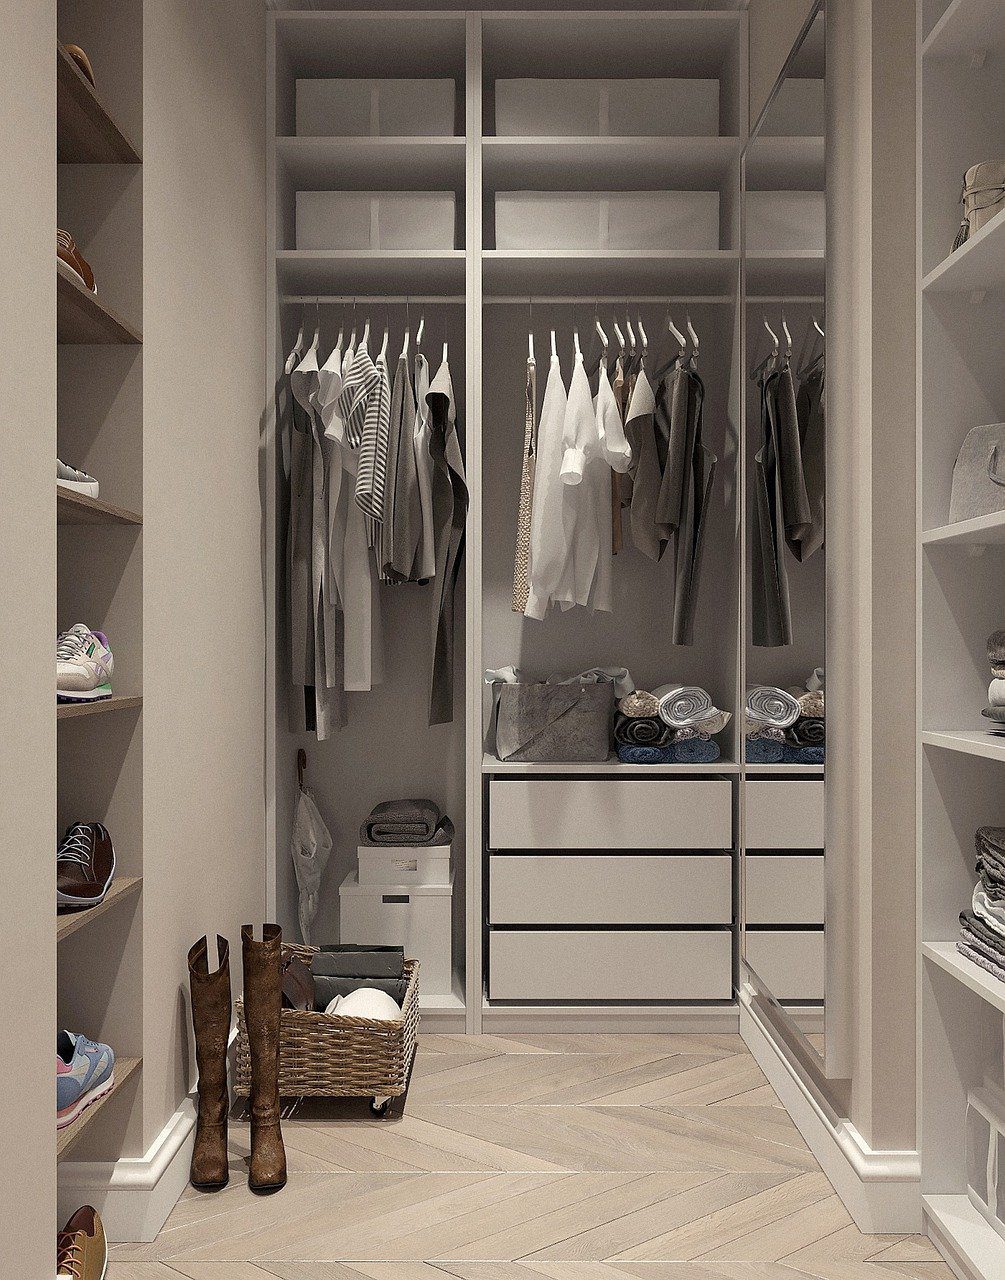 Is Your Closet Overstuffed? Learn How To Trim It Down